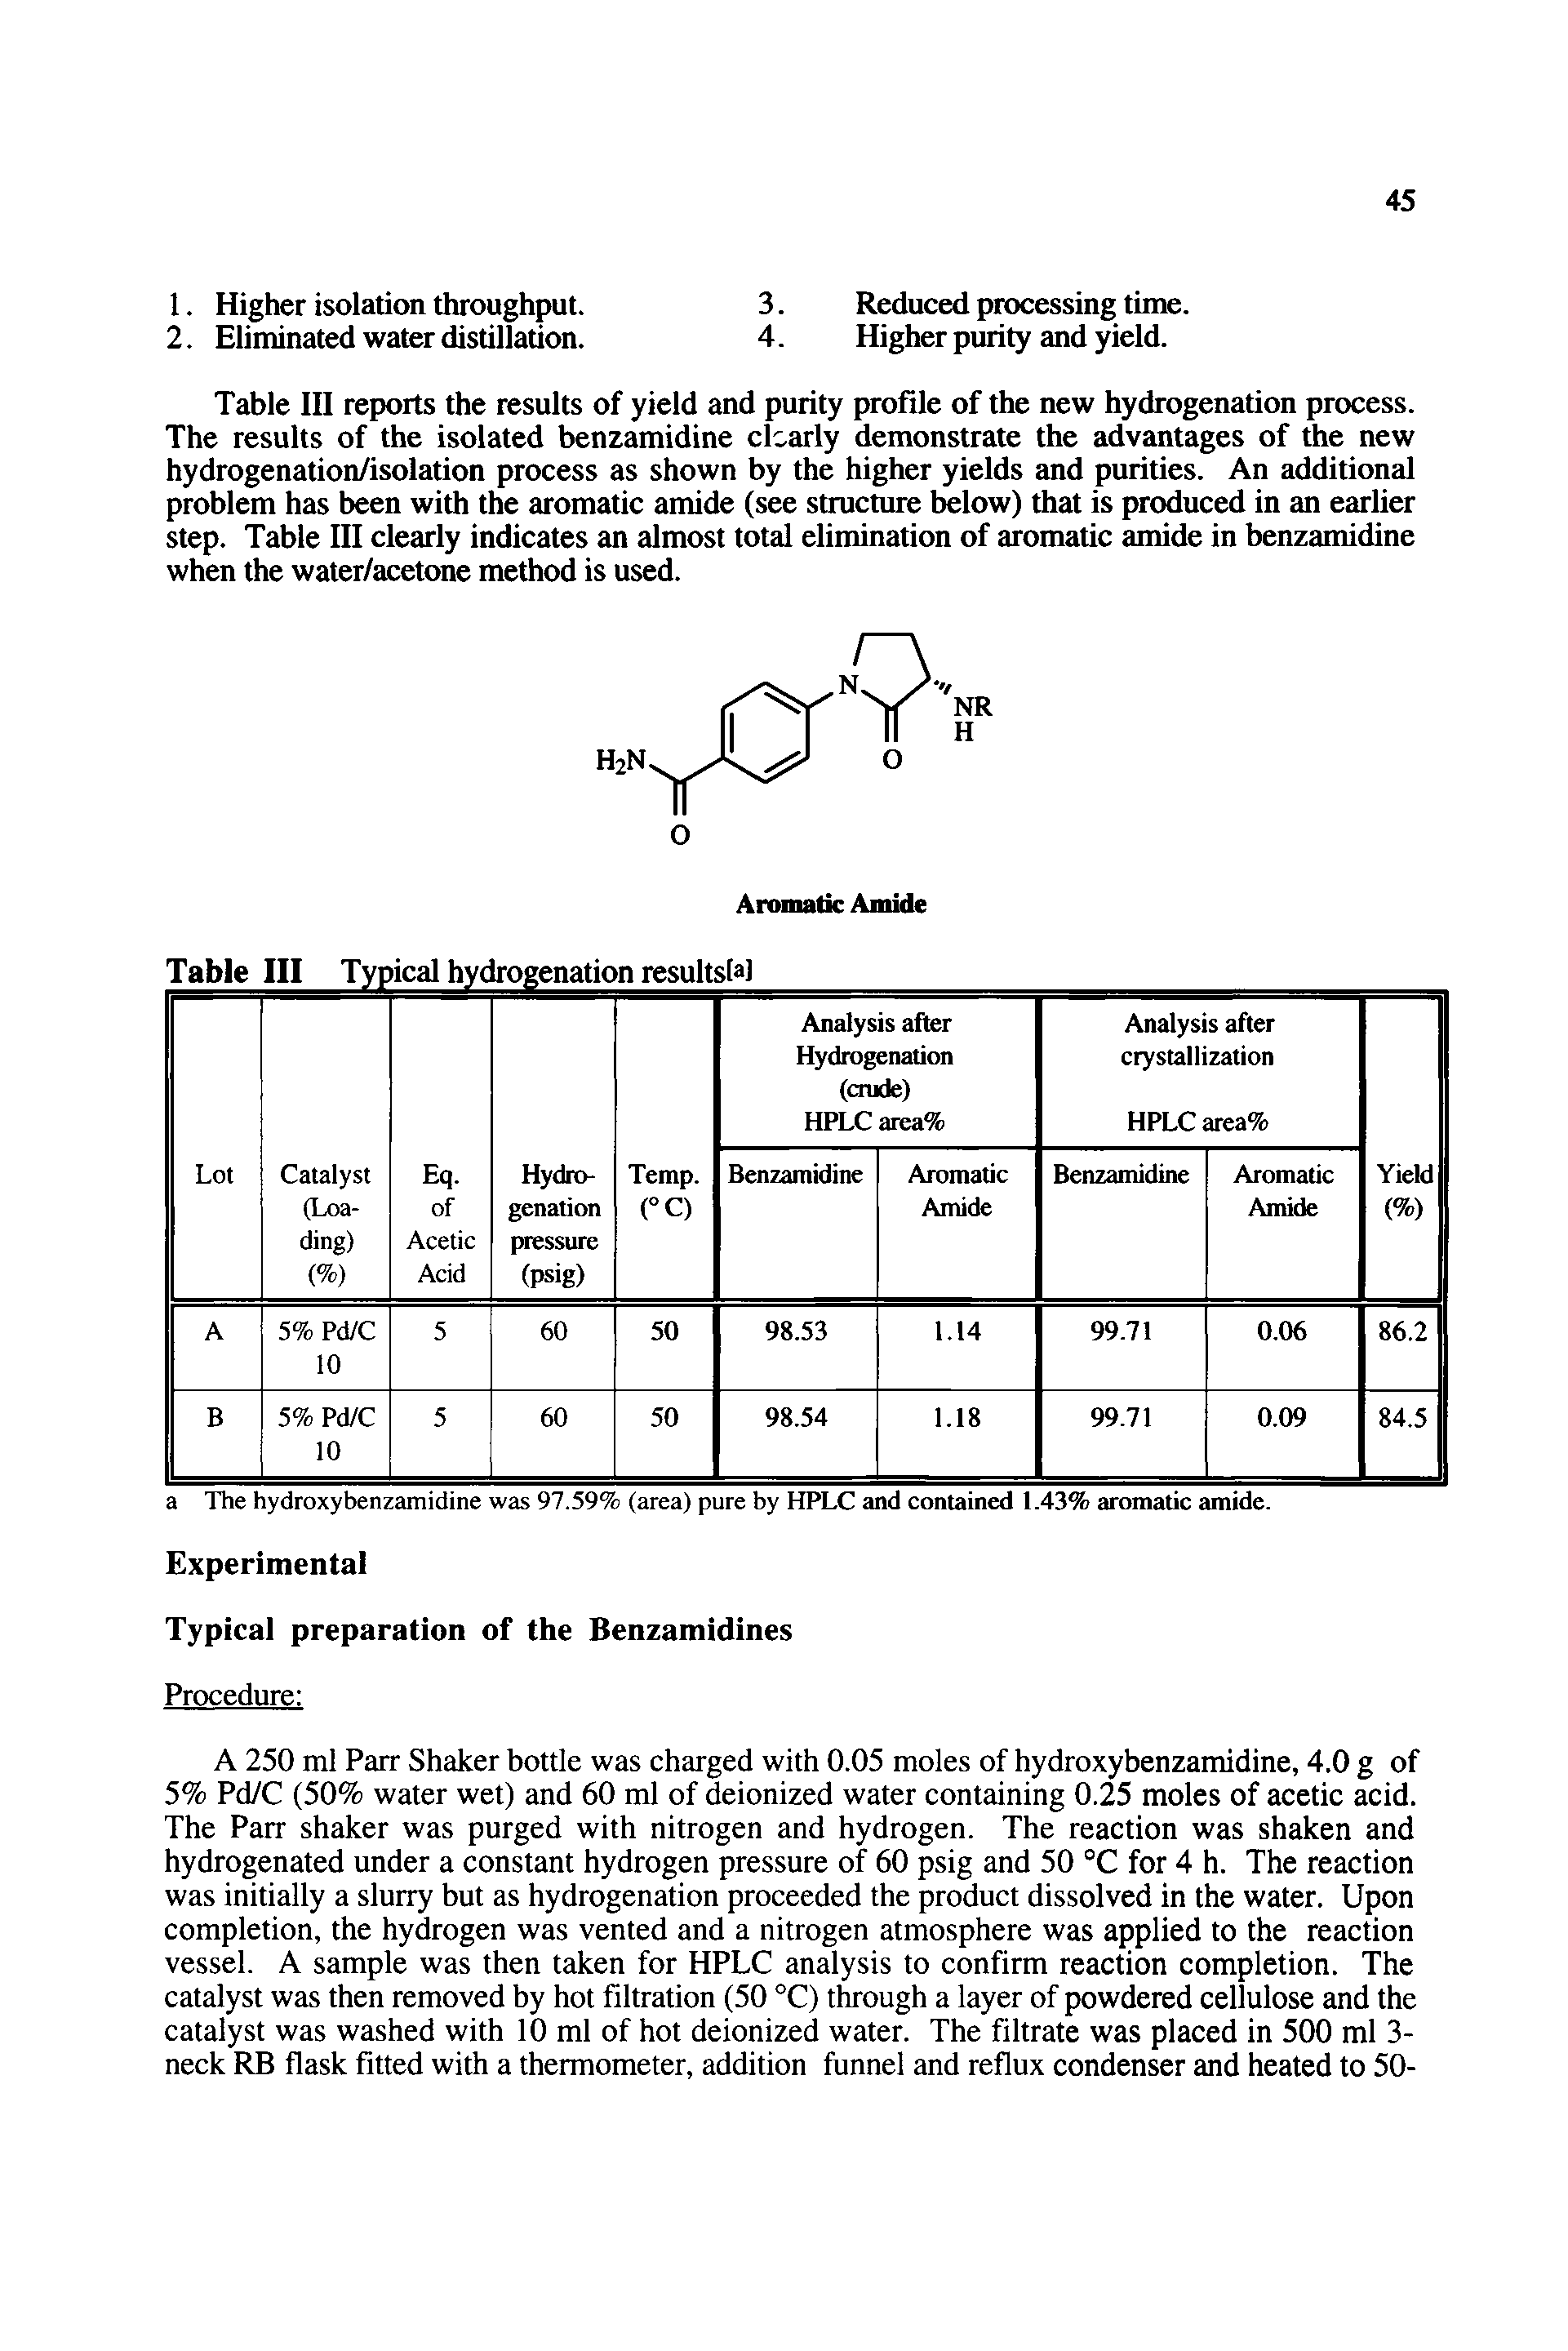 Table III reports the results of yield and purity profile of the new hydrogenation process. The results of the isolated benzamidine clearly demonstrate the advantages of the new hydrogenation/isolation process as shown by the higher yields and purities. An additional problem has been with the aromatic amide (see structure Mow) that is produced in an earlier step. Table III clearly indicates an almost total elimination of aromatic amide in benzamidine when the water/acetone method is used.